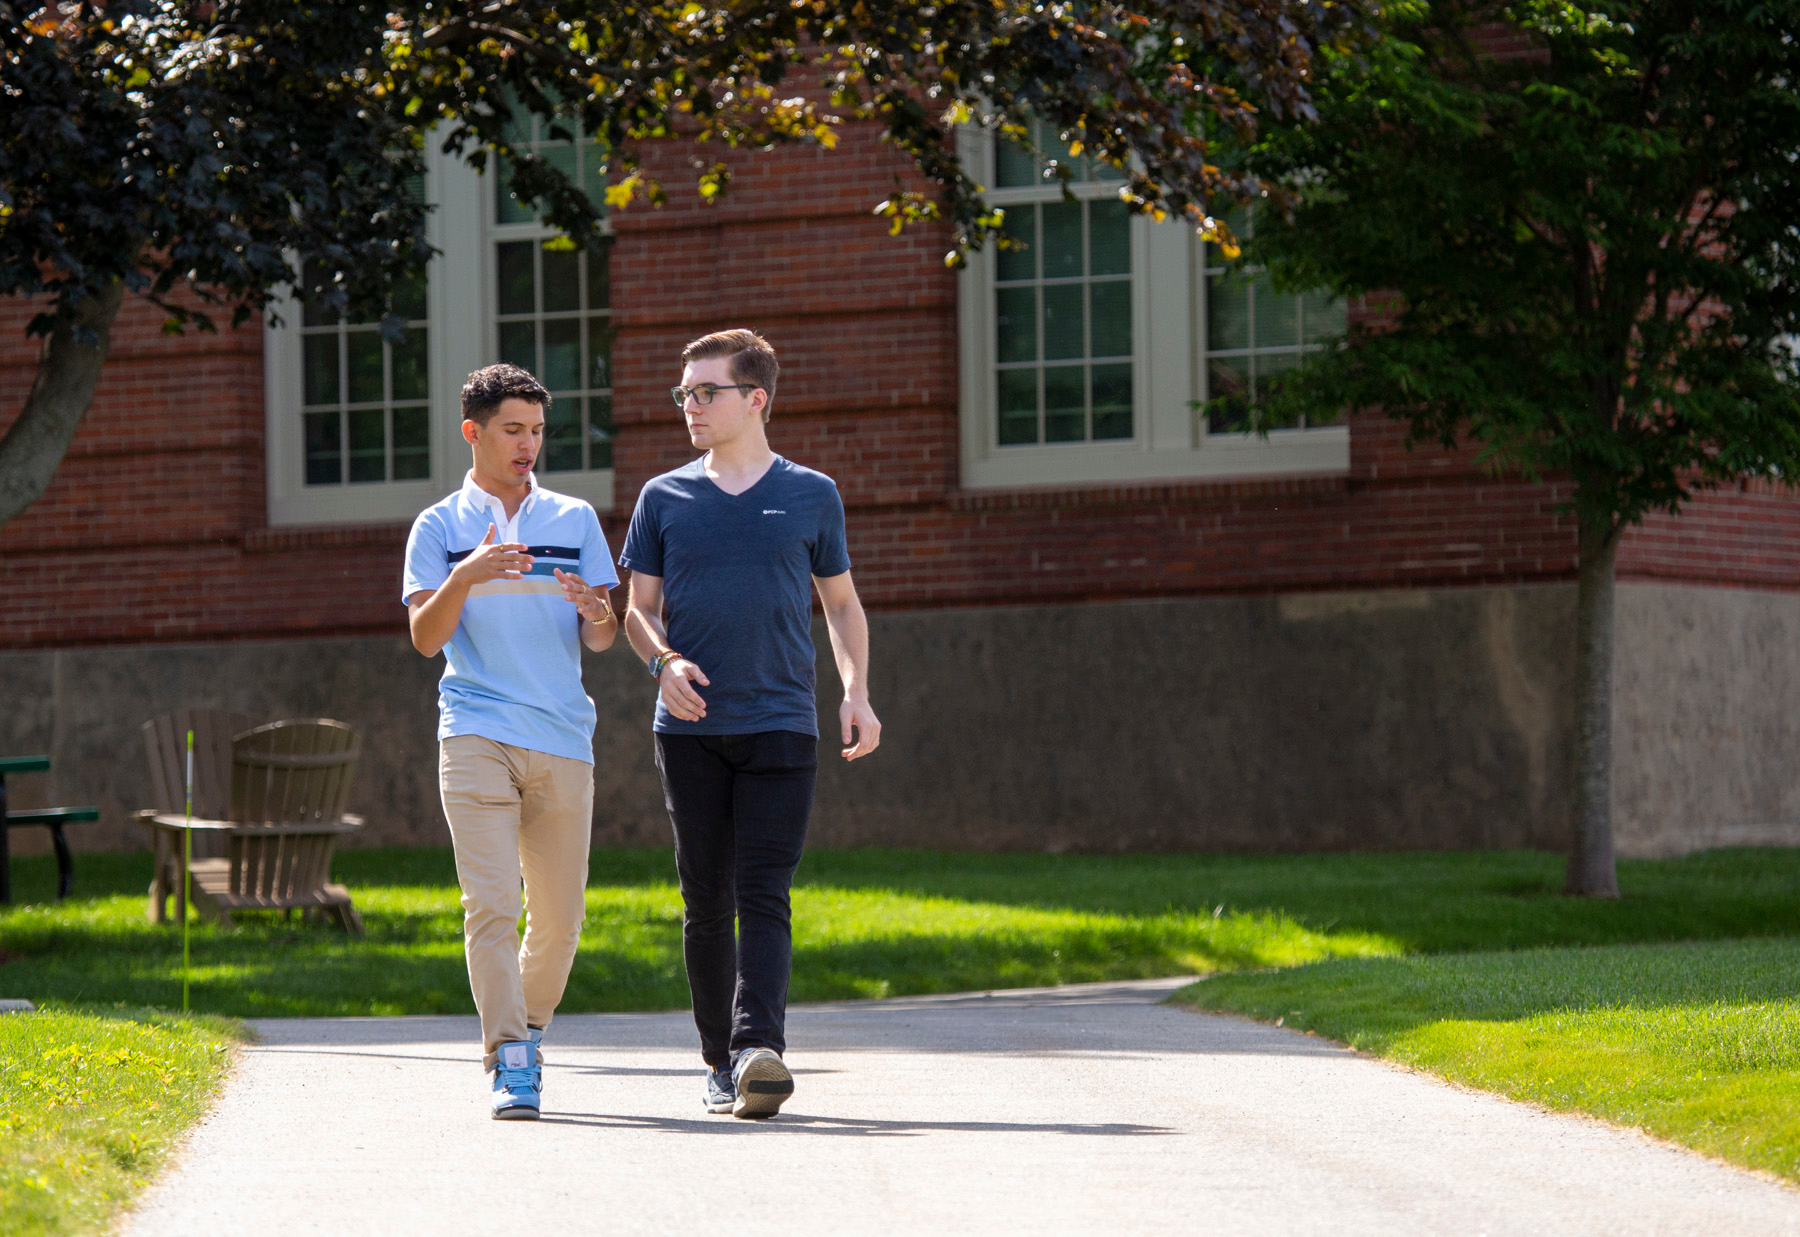 Two Worcester State Students talking together as they walk on campus